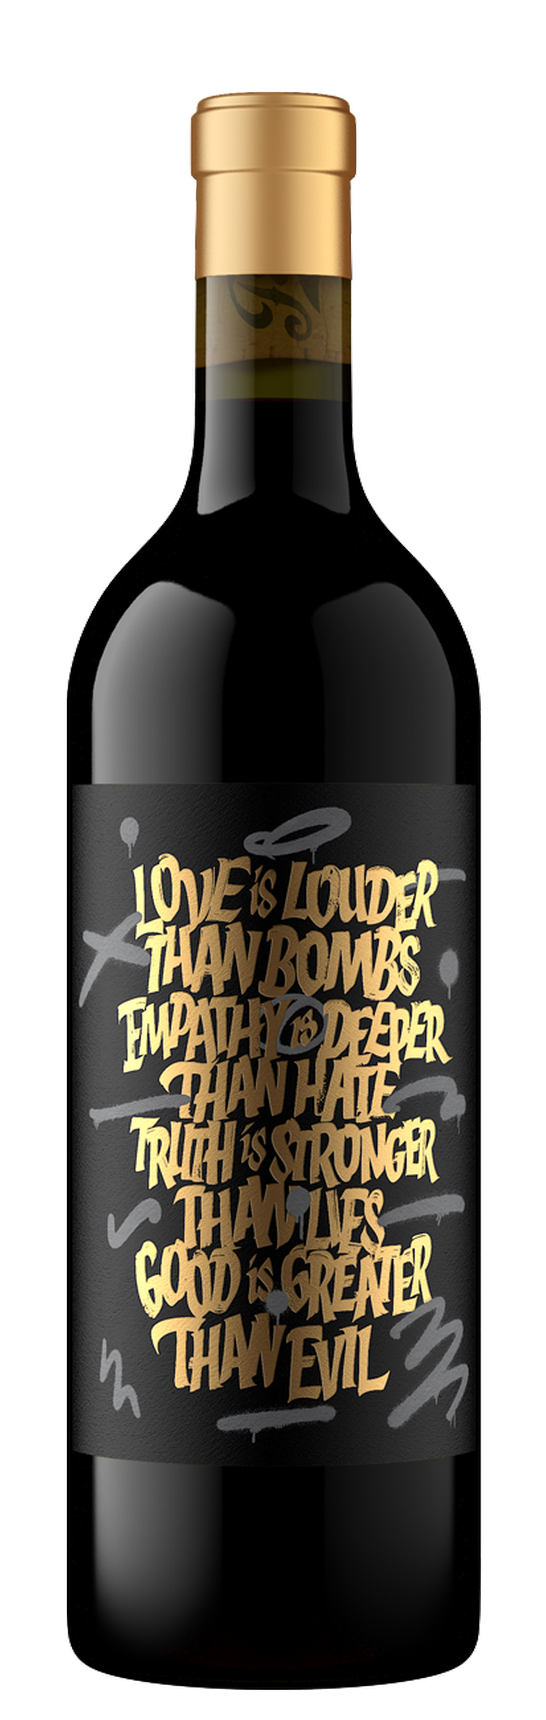 2020 Love Is Louder Than Bombs, Red Wine, Amador County